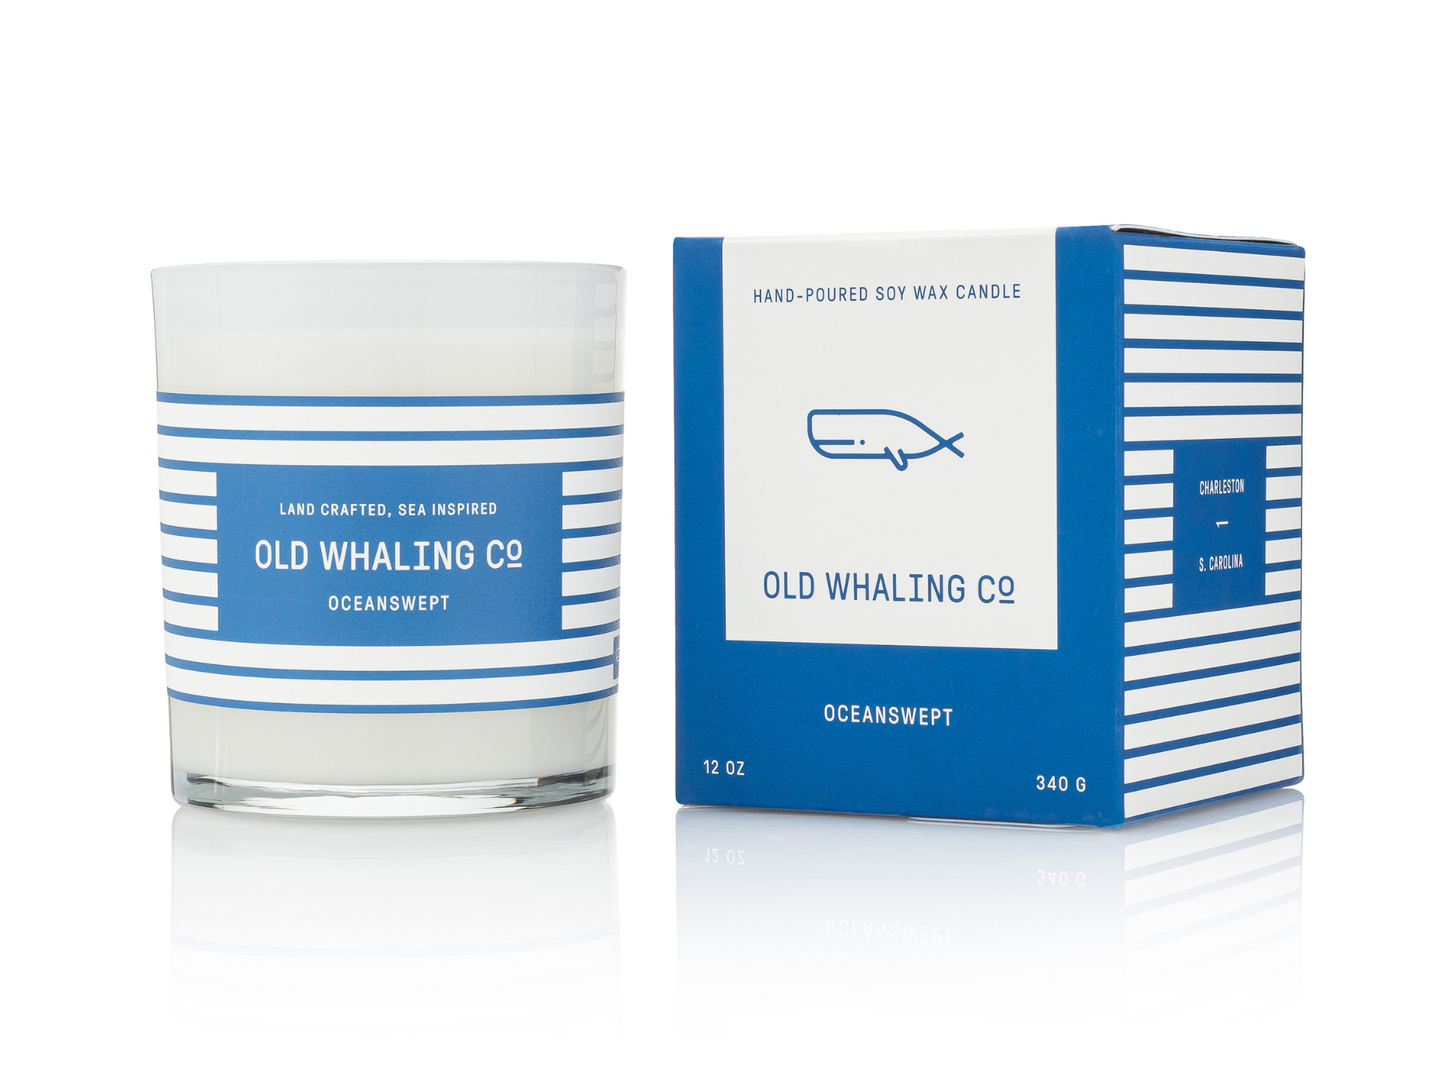 Old Whaling Oceanswept Candle